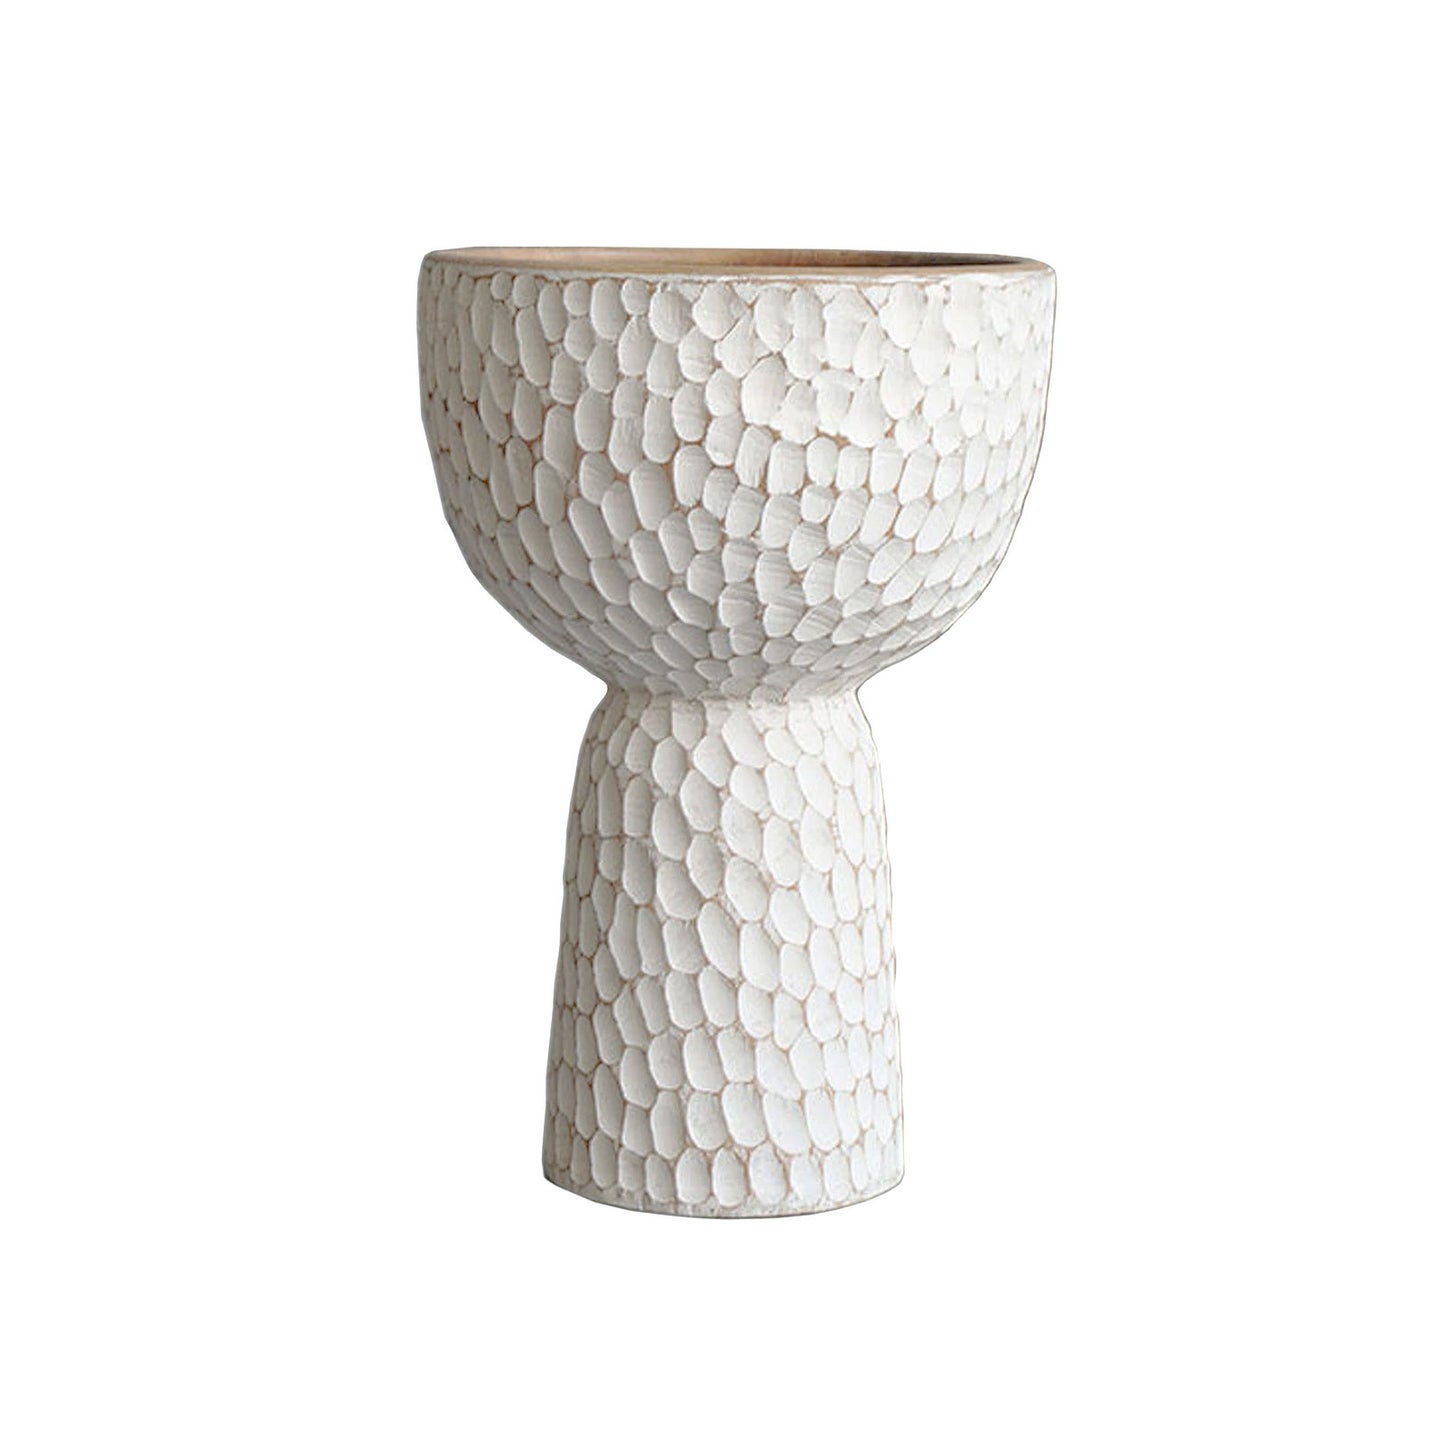 Carved Bubble Teak Bowl, Tall